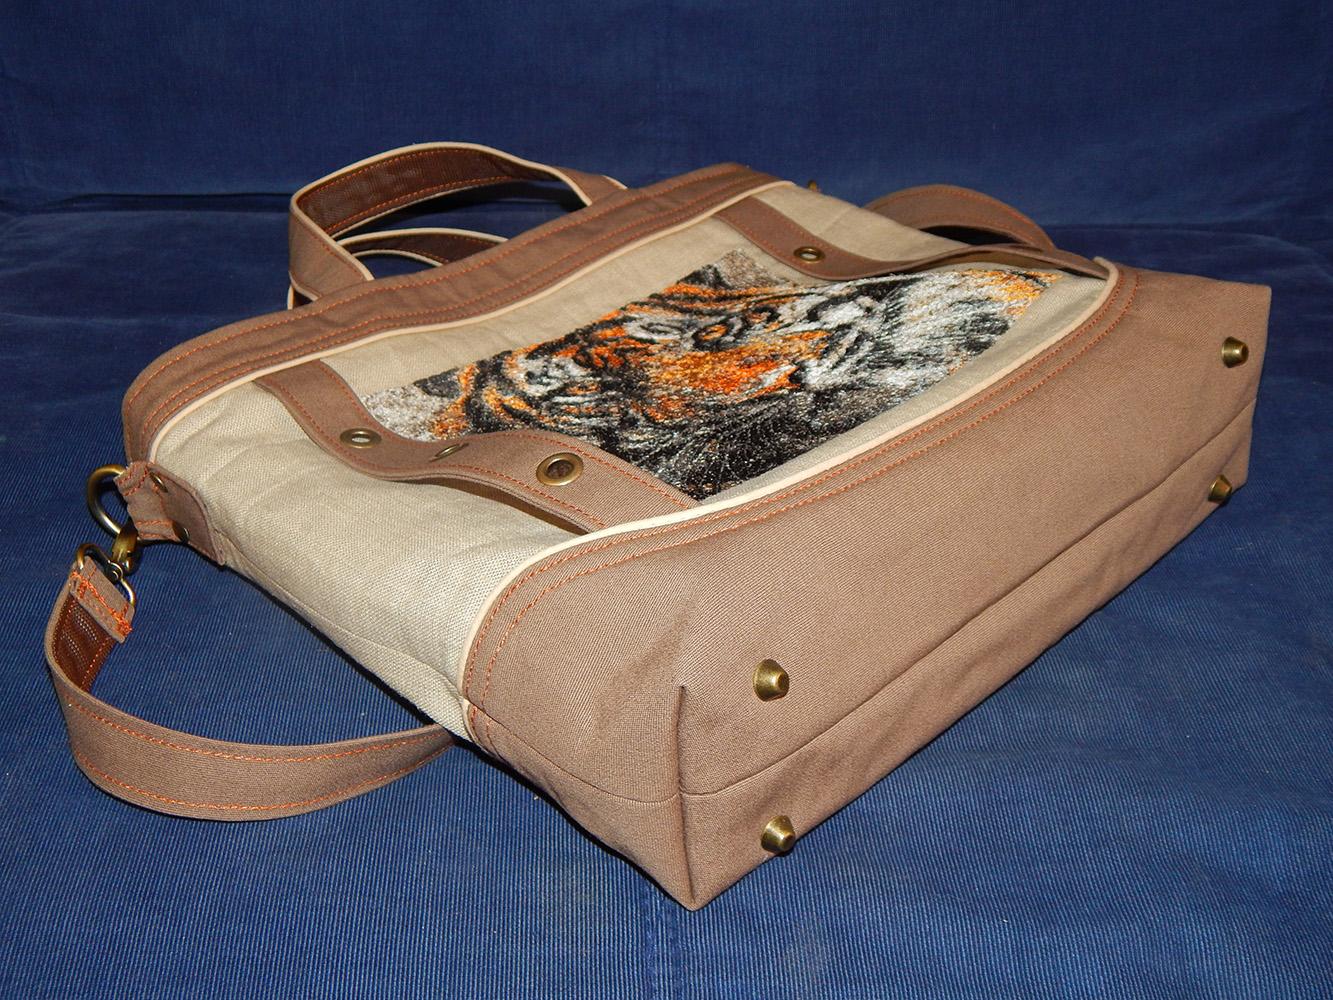 Embroidered bag with tiger design